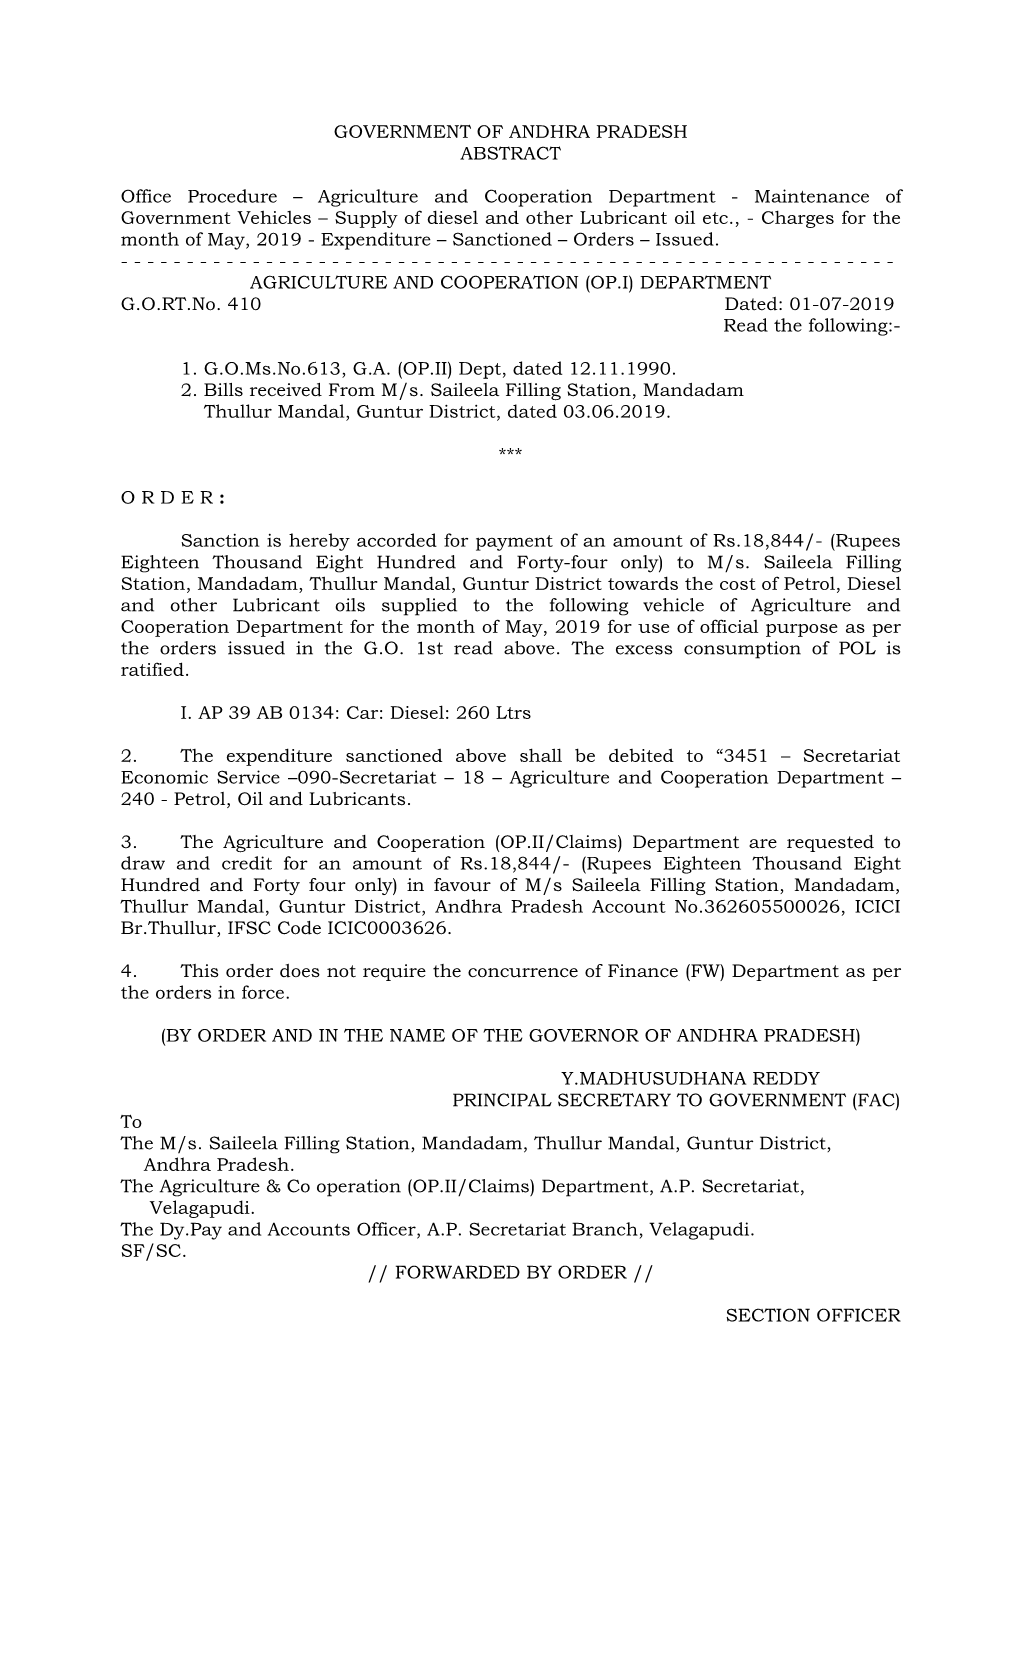 GOVERNMENT of ANDHRA PRADESH ABSTRACT Office